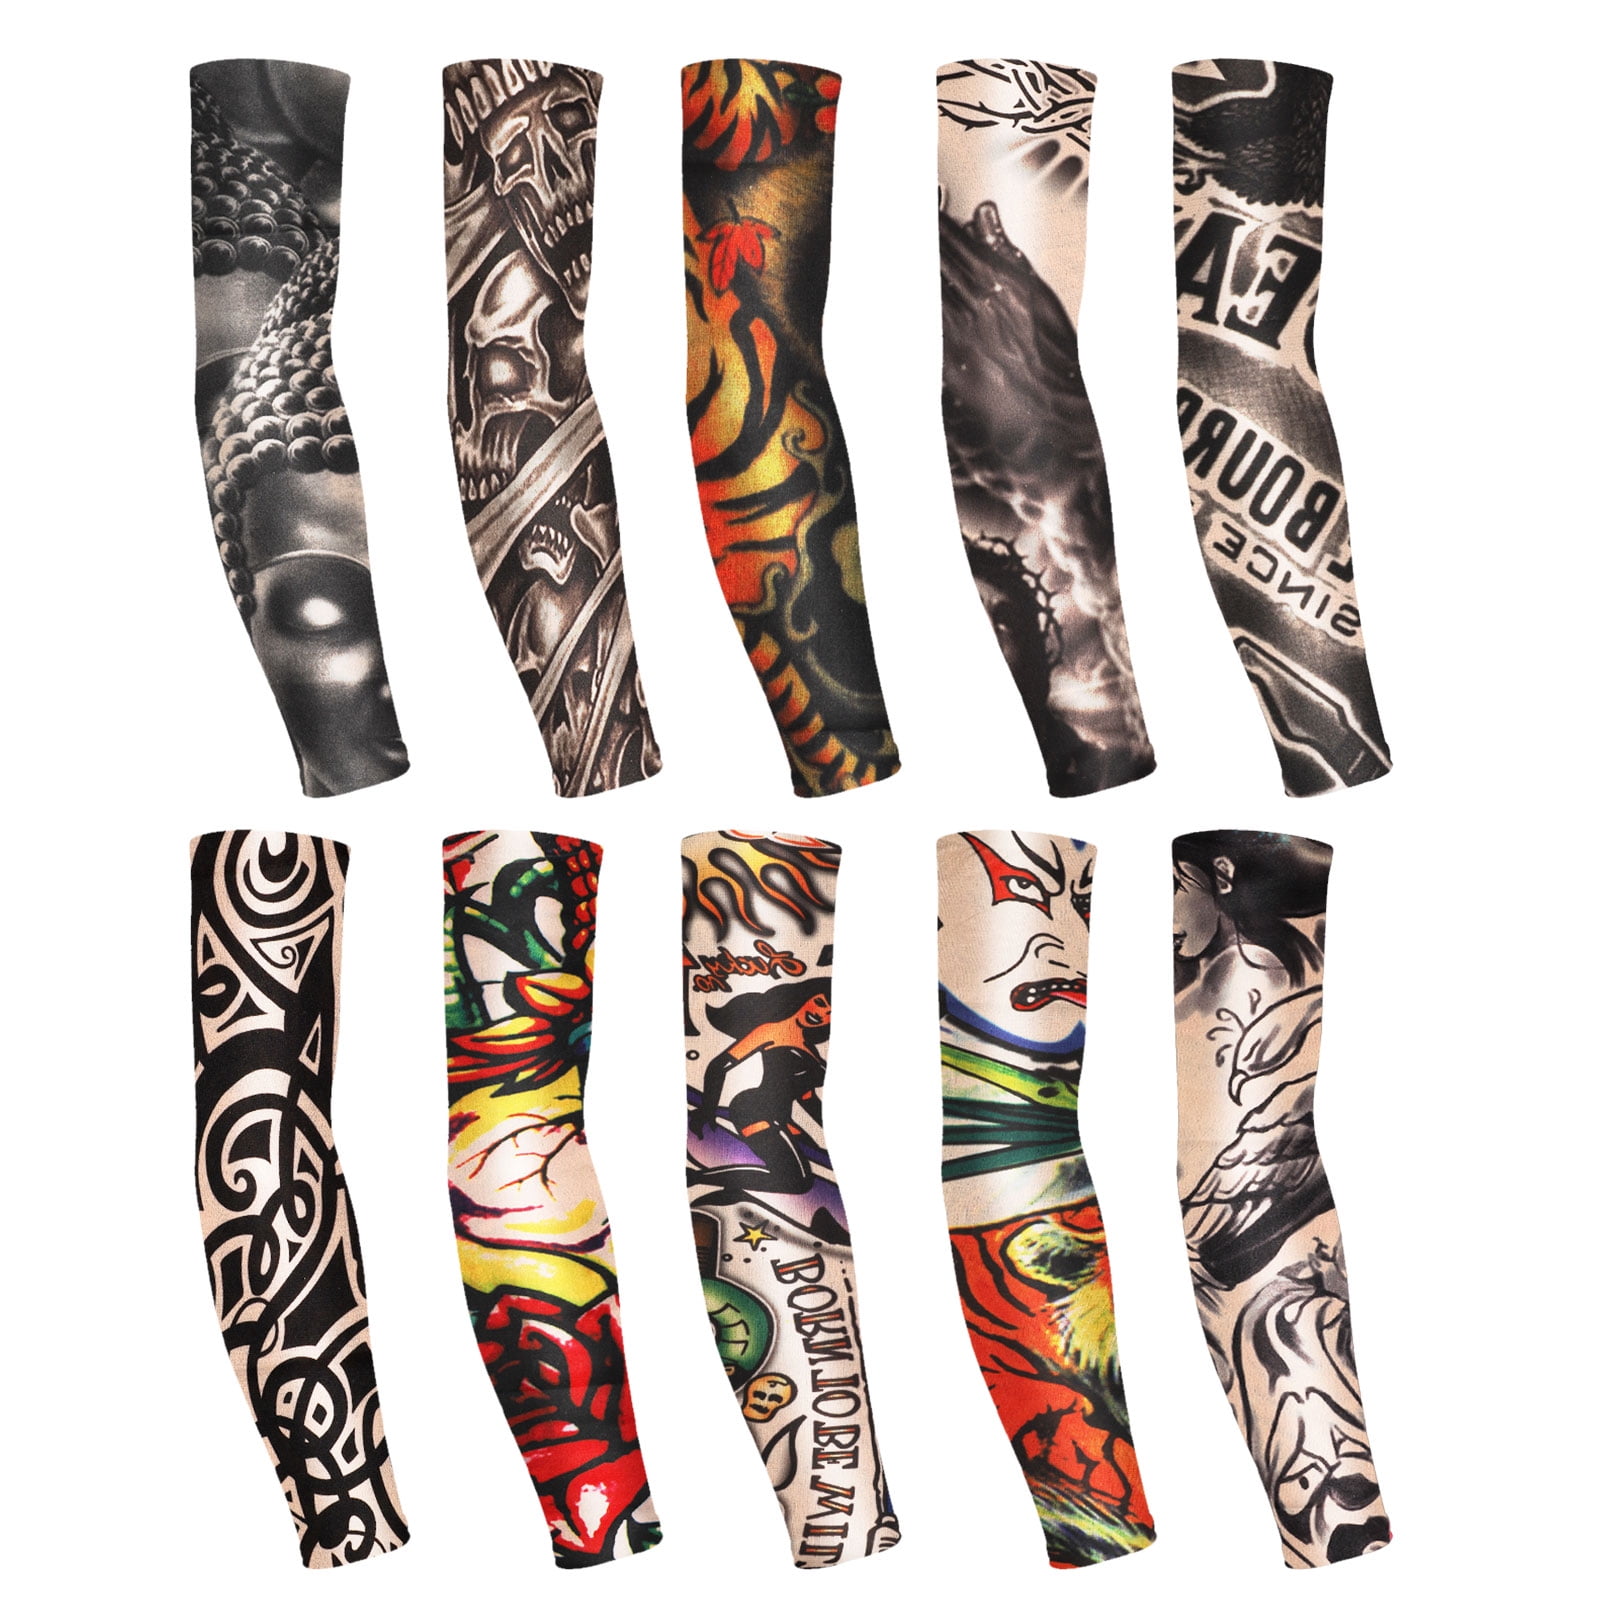 5pcs Tattoo Cooling Arm Sleeves Men Basketball Running UV Sun Protection Outdoor 